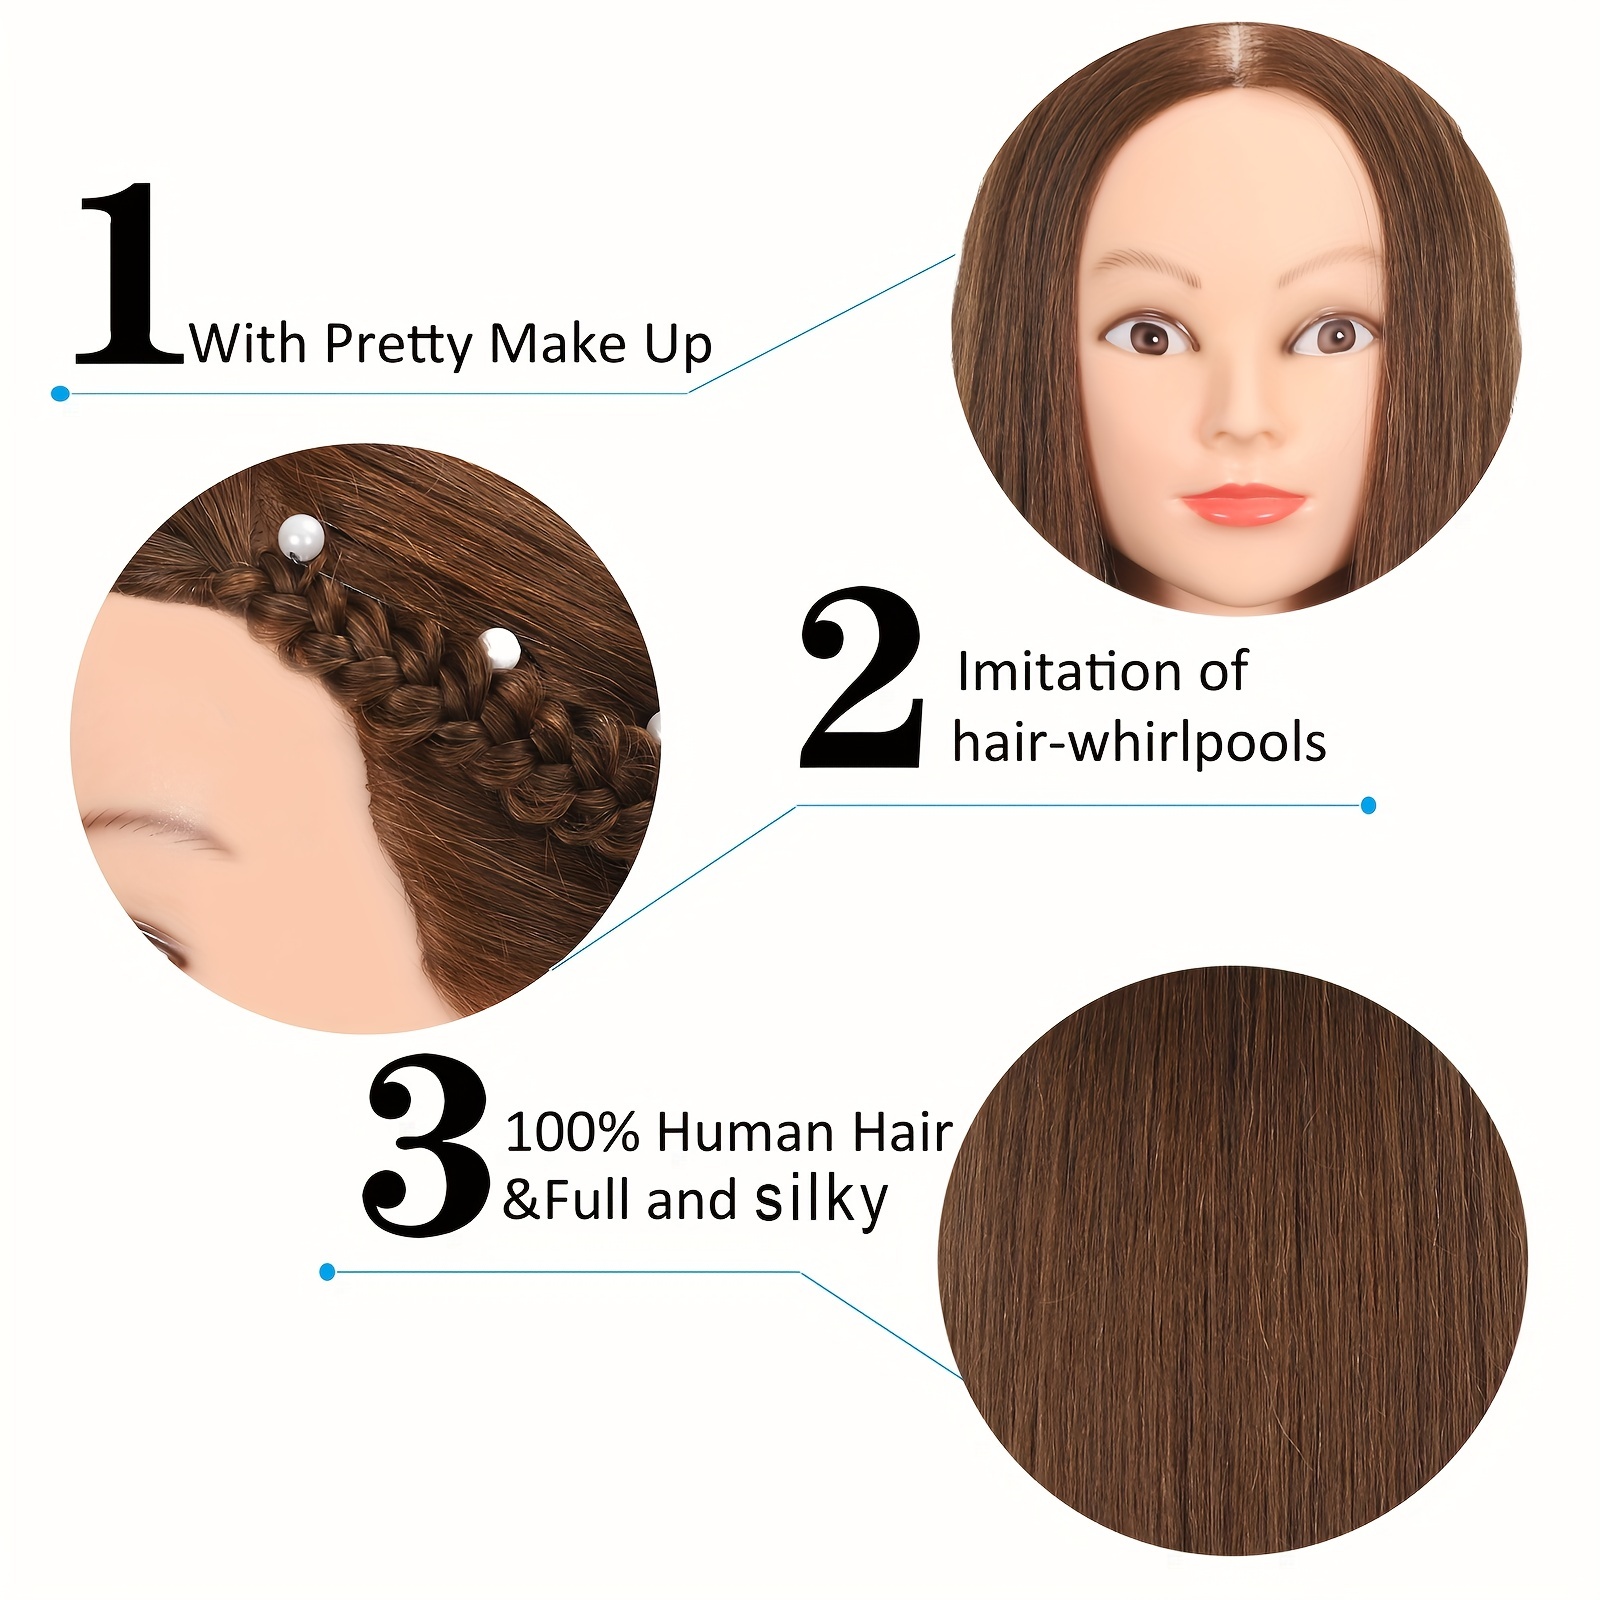 EXQUISITE LOOKS 100% Mannequin Head Human Hair with Stand, Hairdressers'  Practice Training Manikin Head and Cosmotology Doll Head for Hairstyling  and Braid - #4 Dark Brown : : Beauty